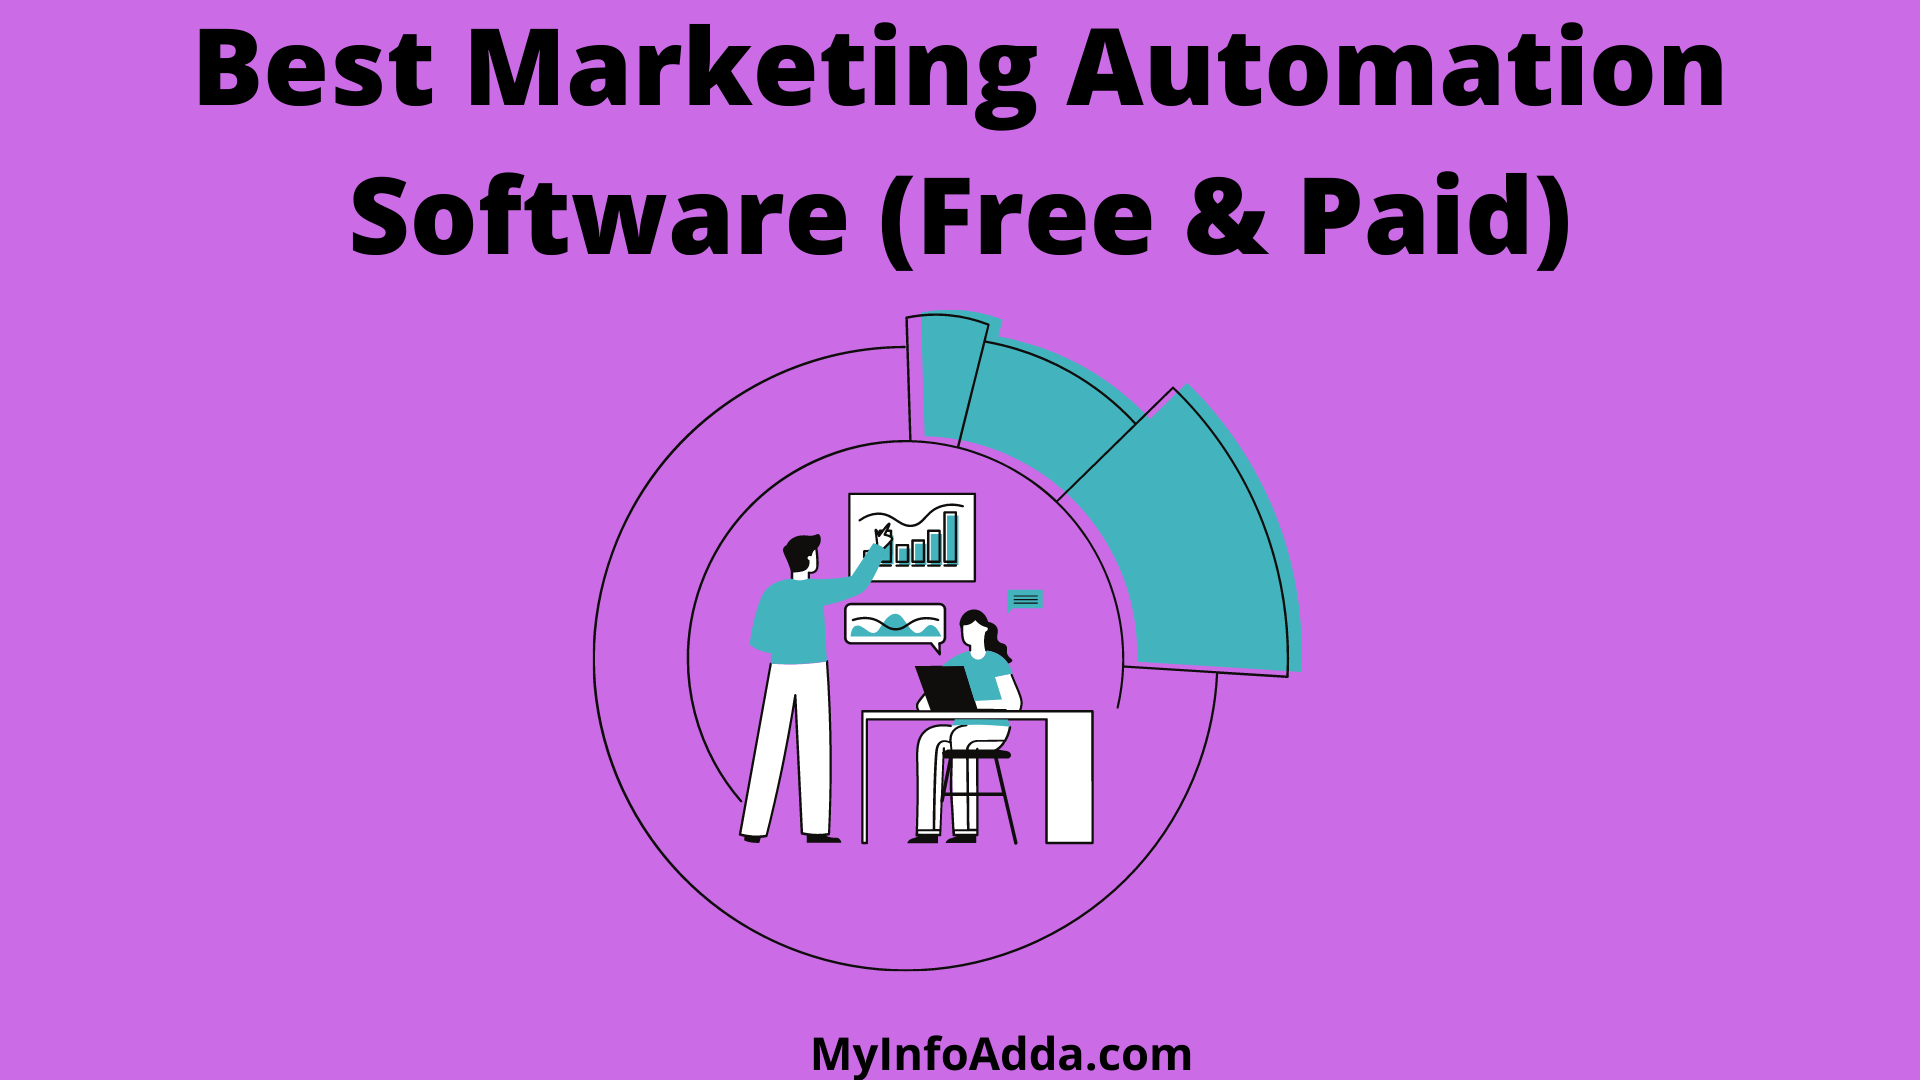 Best Marketing Automation Software (Free & Paid)